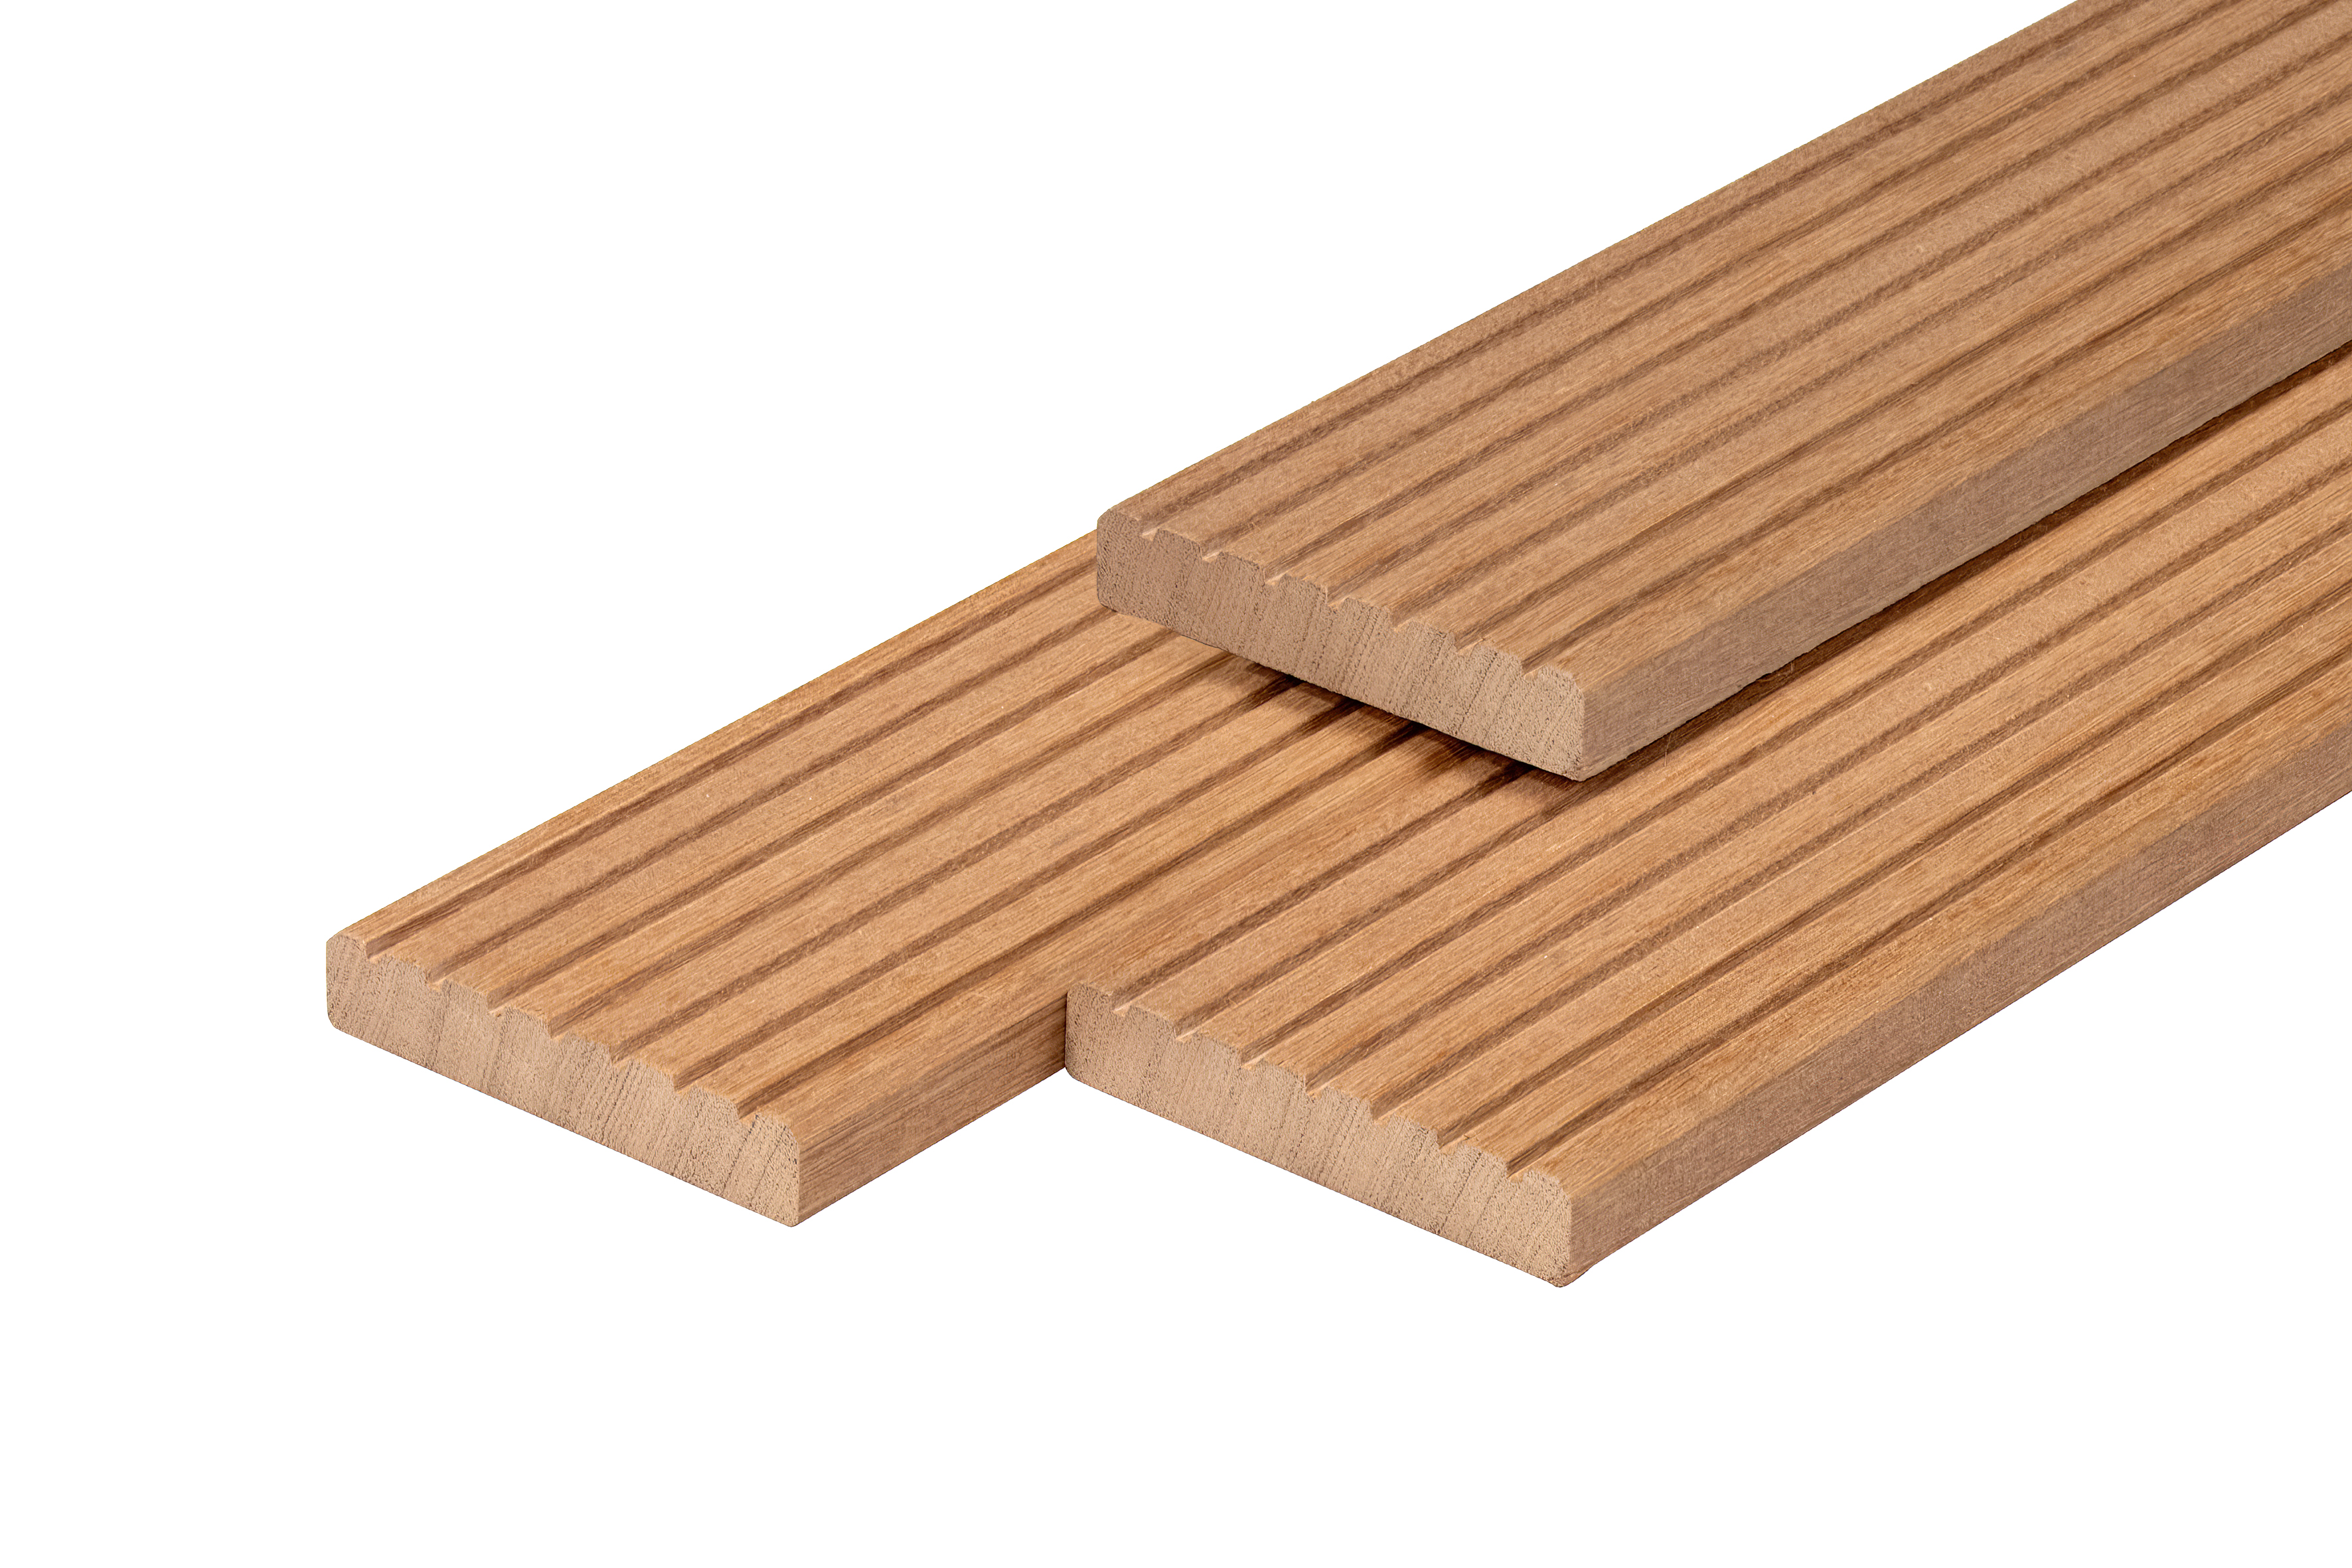 Bangkirai decking board dried 2.5x14.5x460 cm planed 7 grooves + 1 side smooth